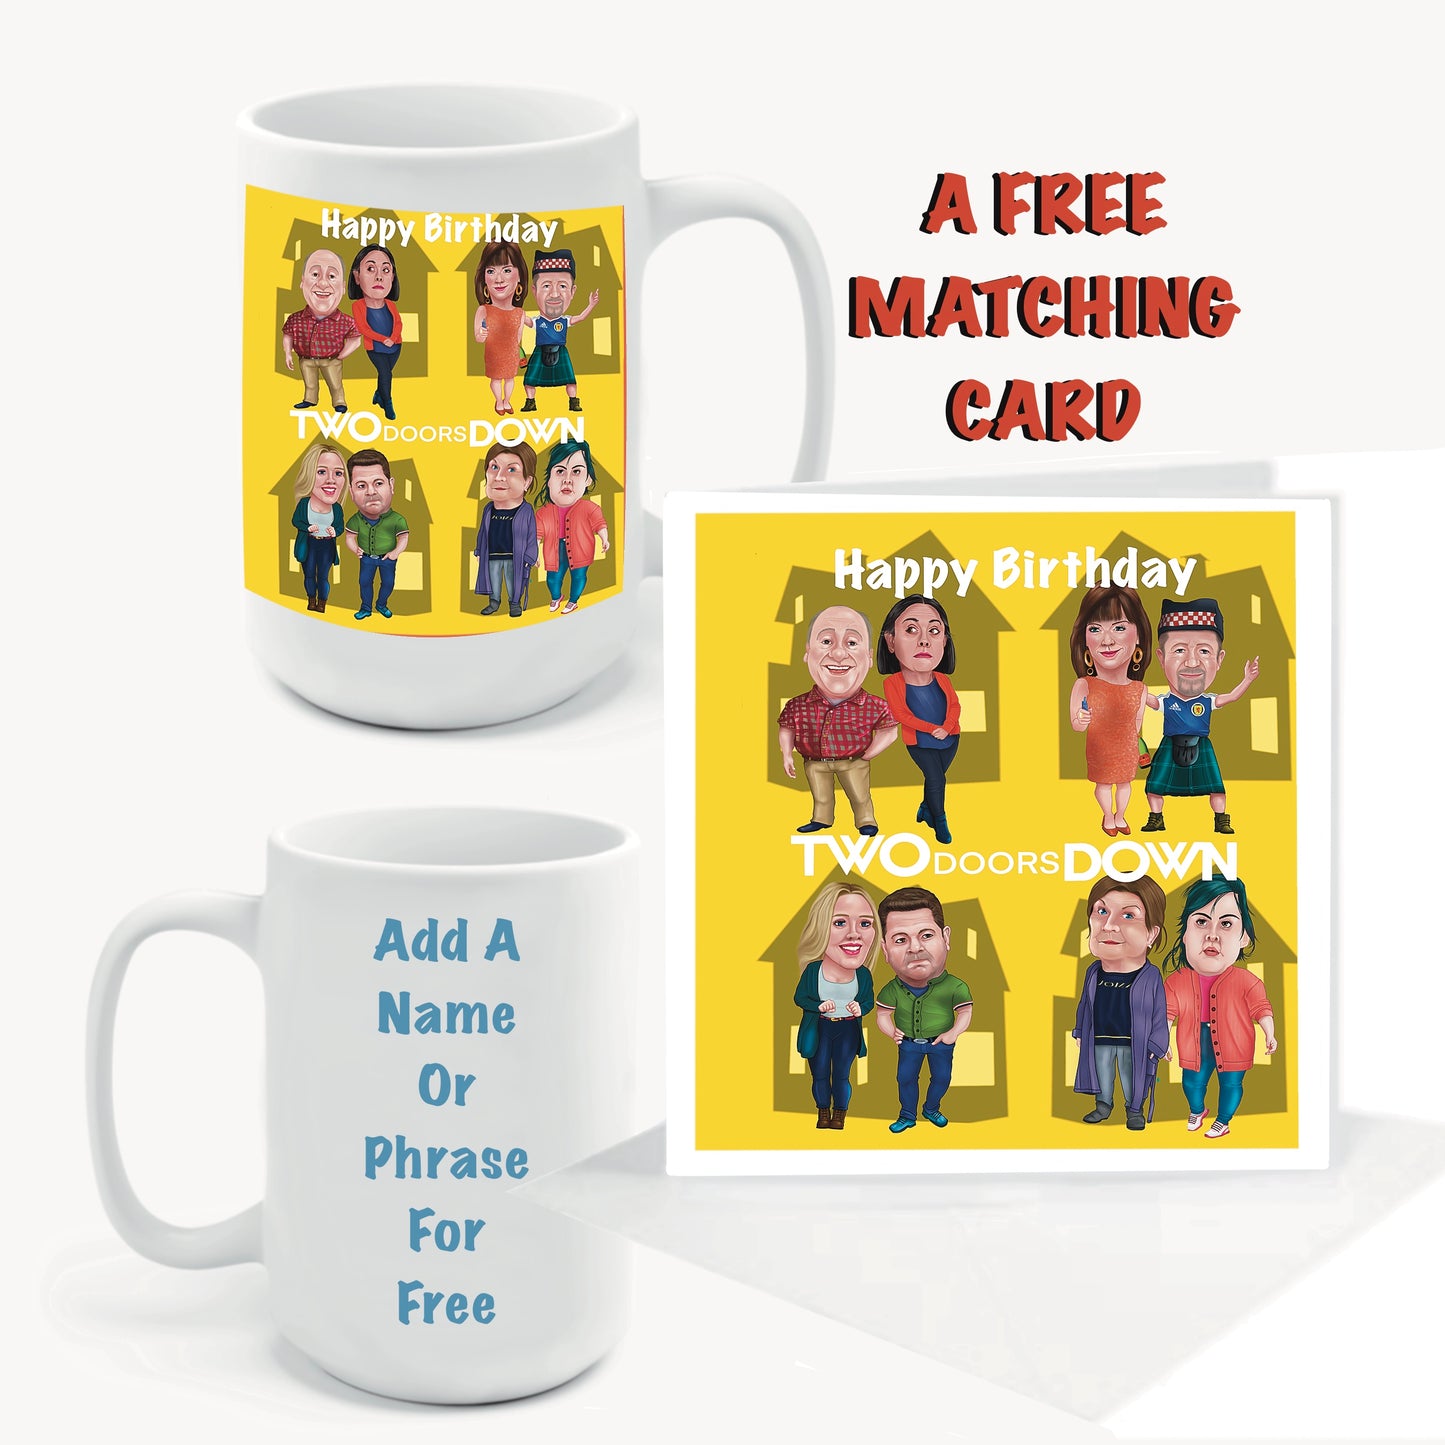 Two Doors Down Mugs-mugs plus a FREE matching Cards-Cards yellow